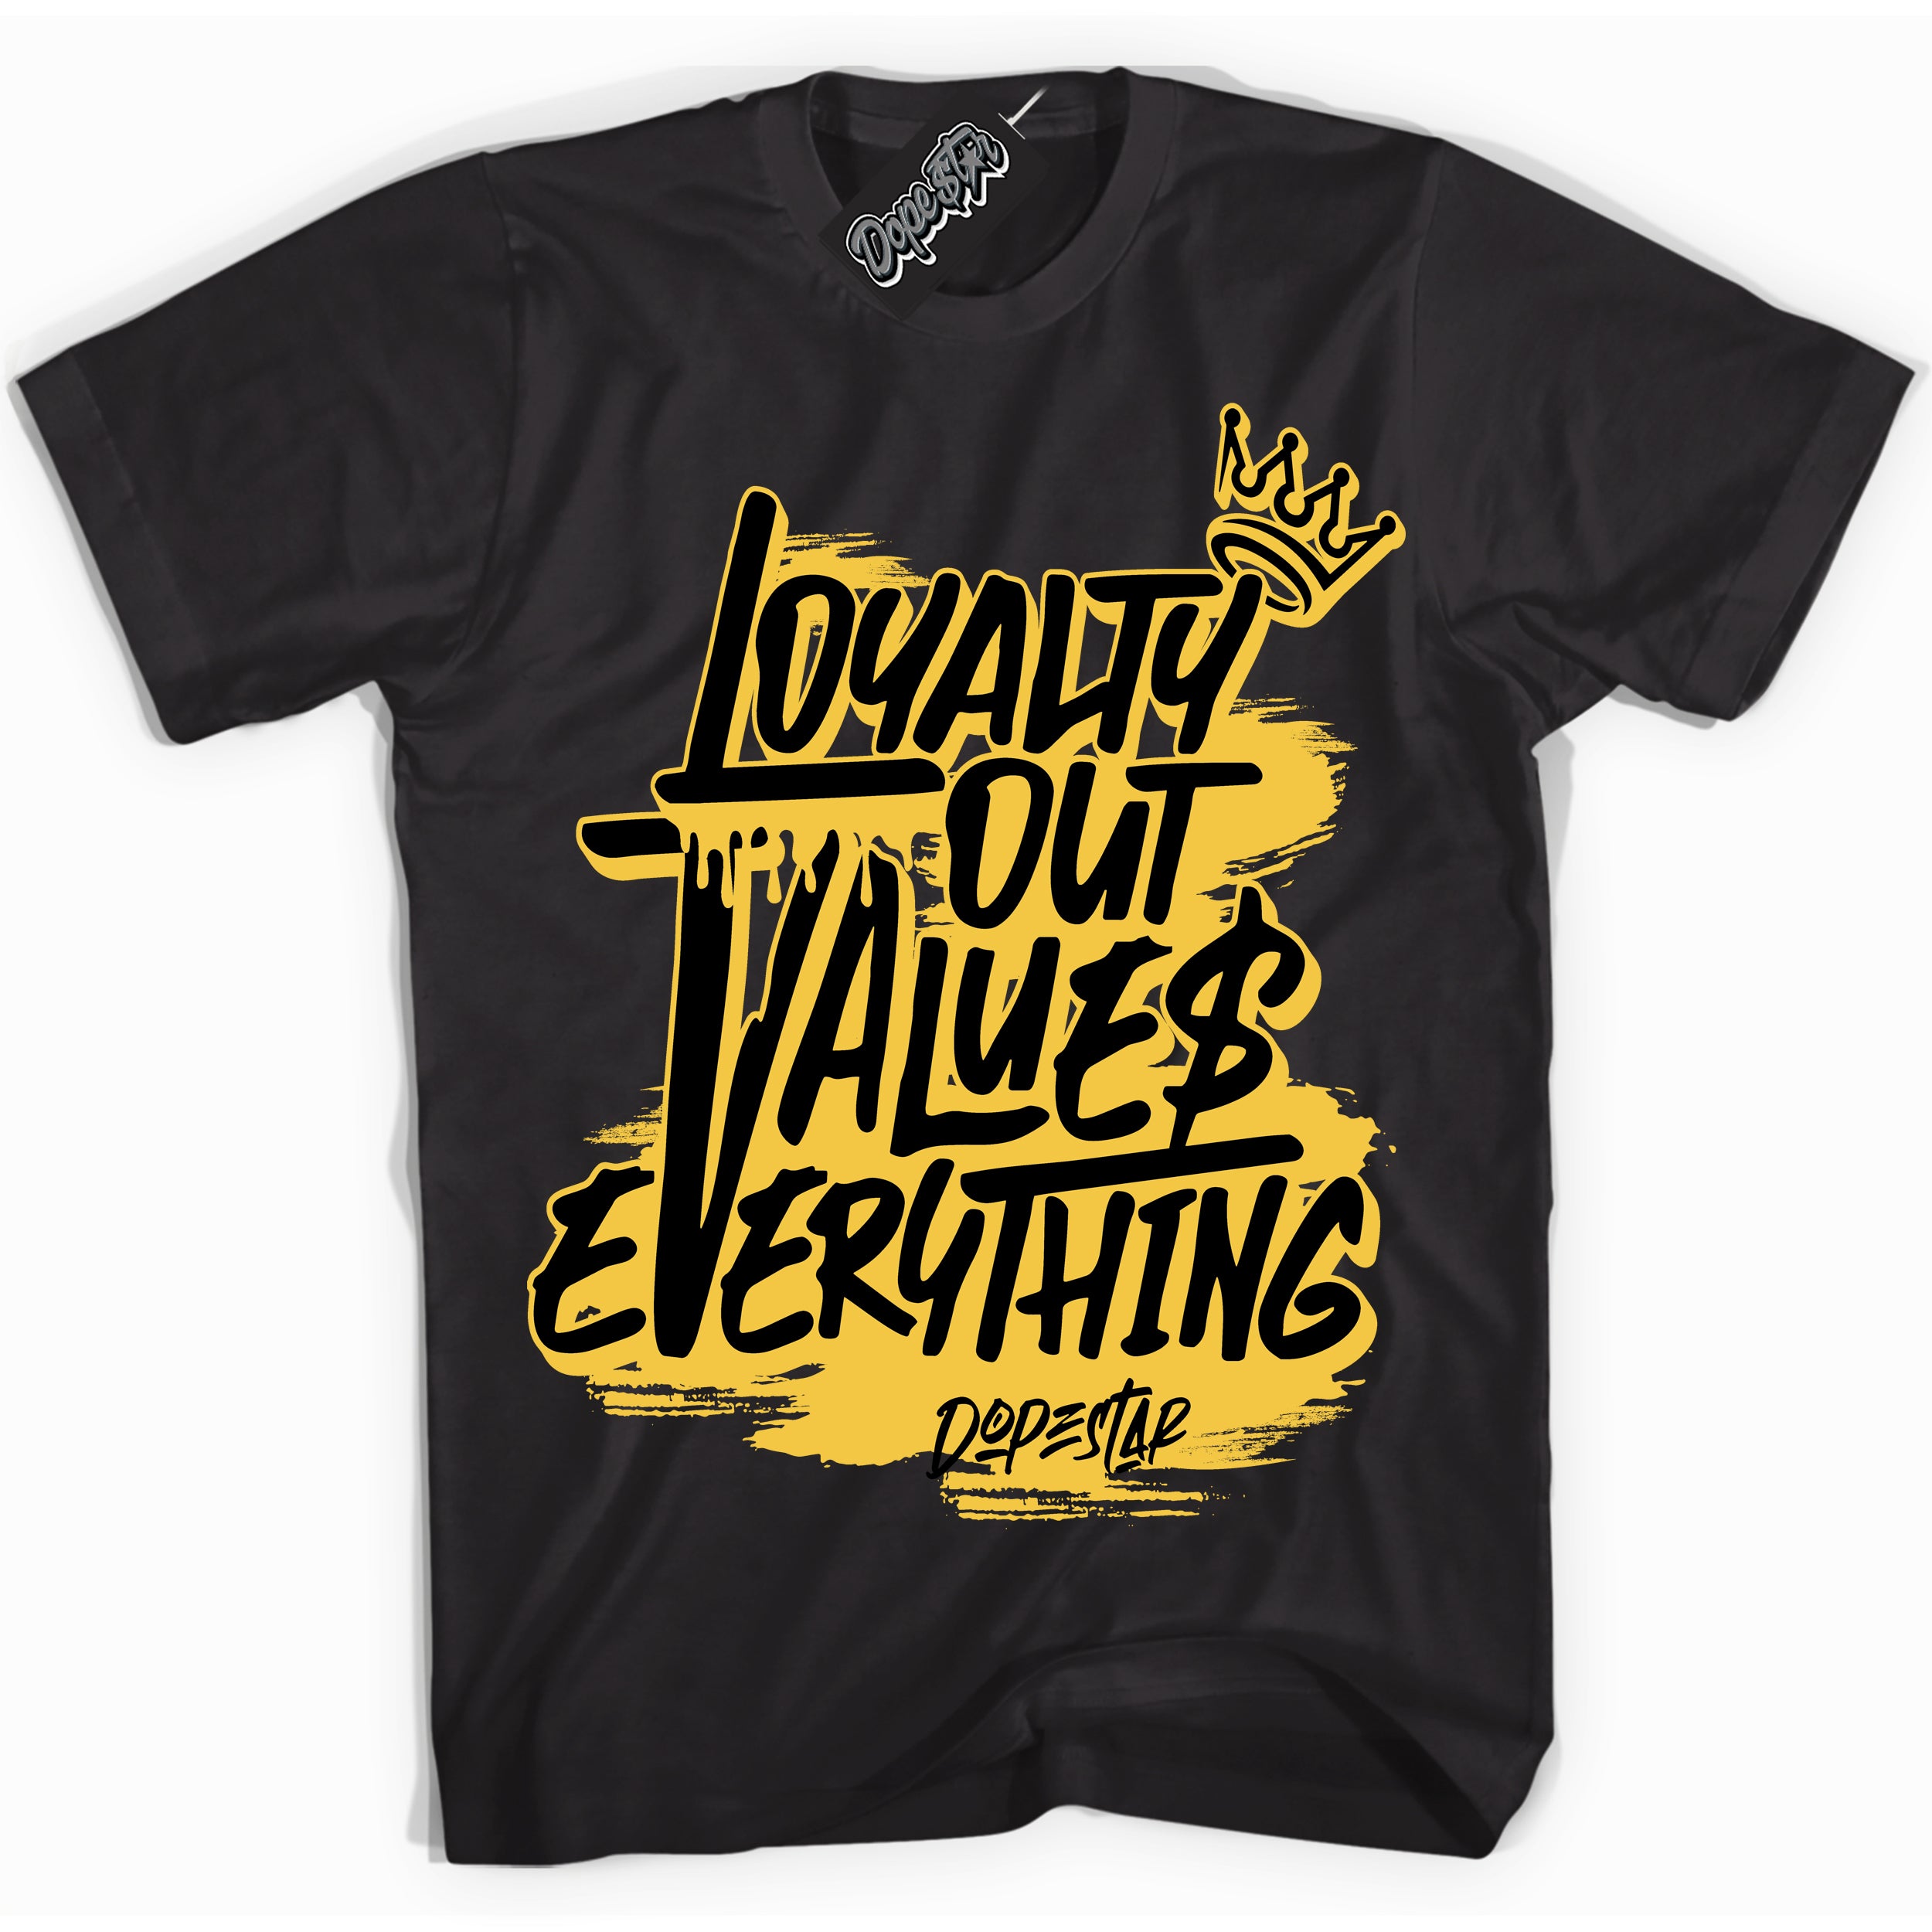 Cool Black Shirt with “ Loyalty Out Values Everything” design that perfectly matches Black Taxi 12s Sneakers.